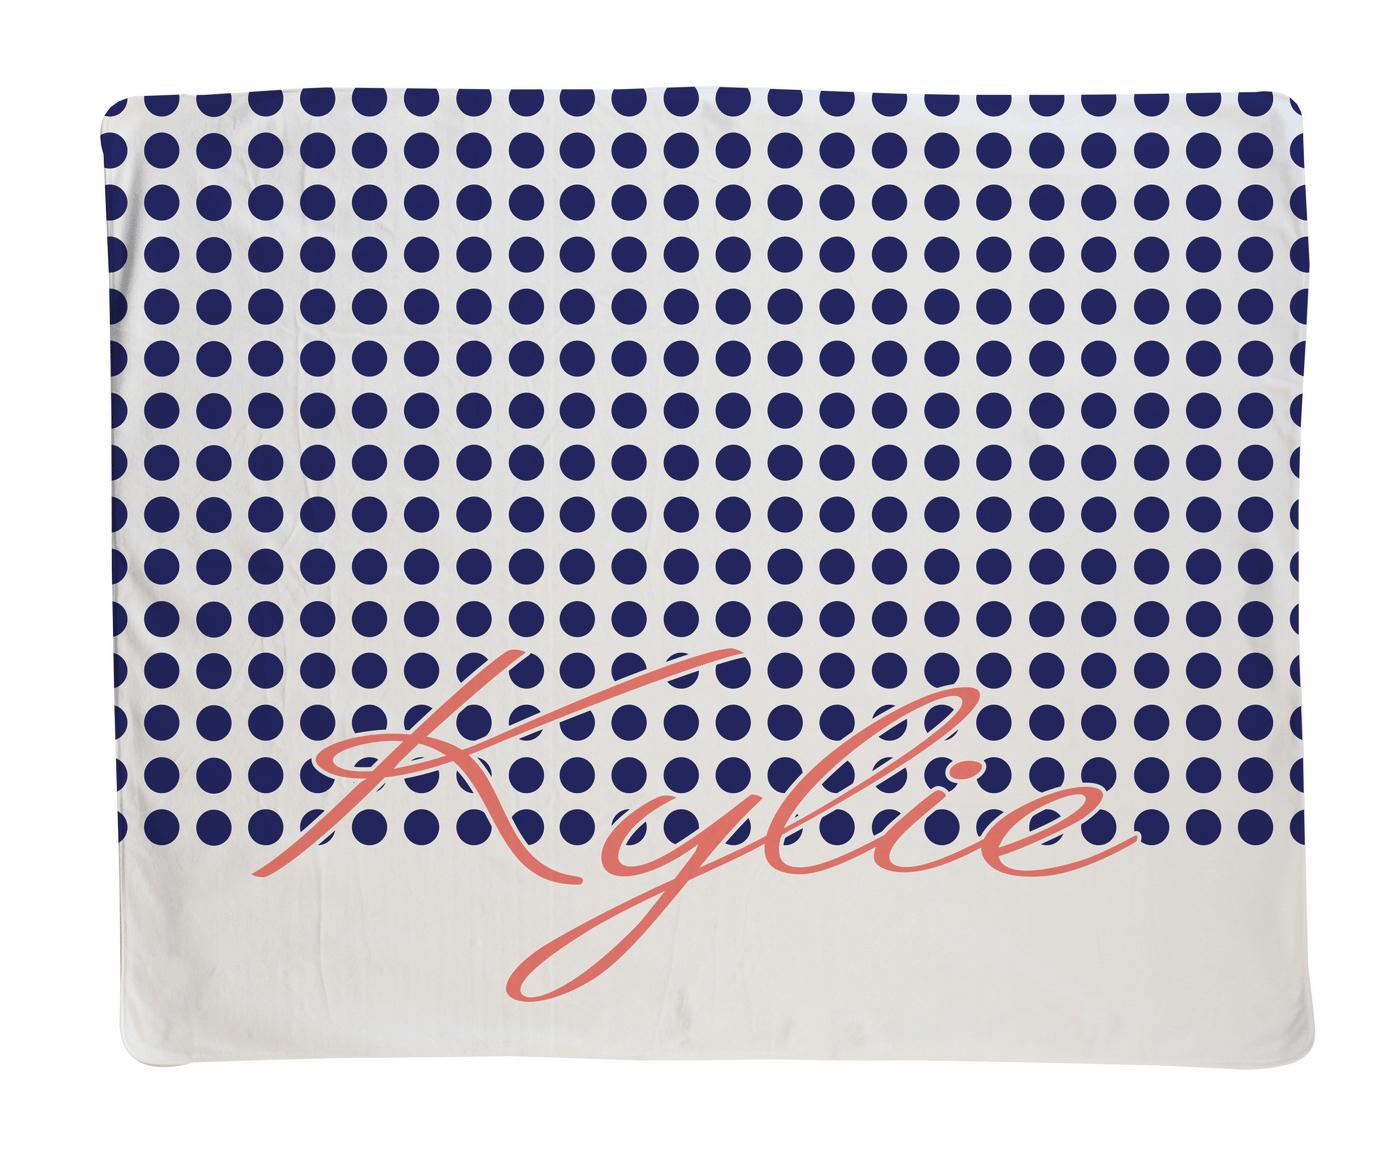 Large Coral & Navy Dots - 2 Color Options!